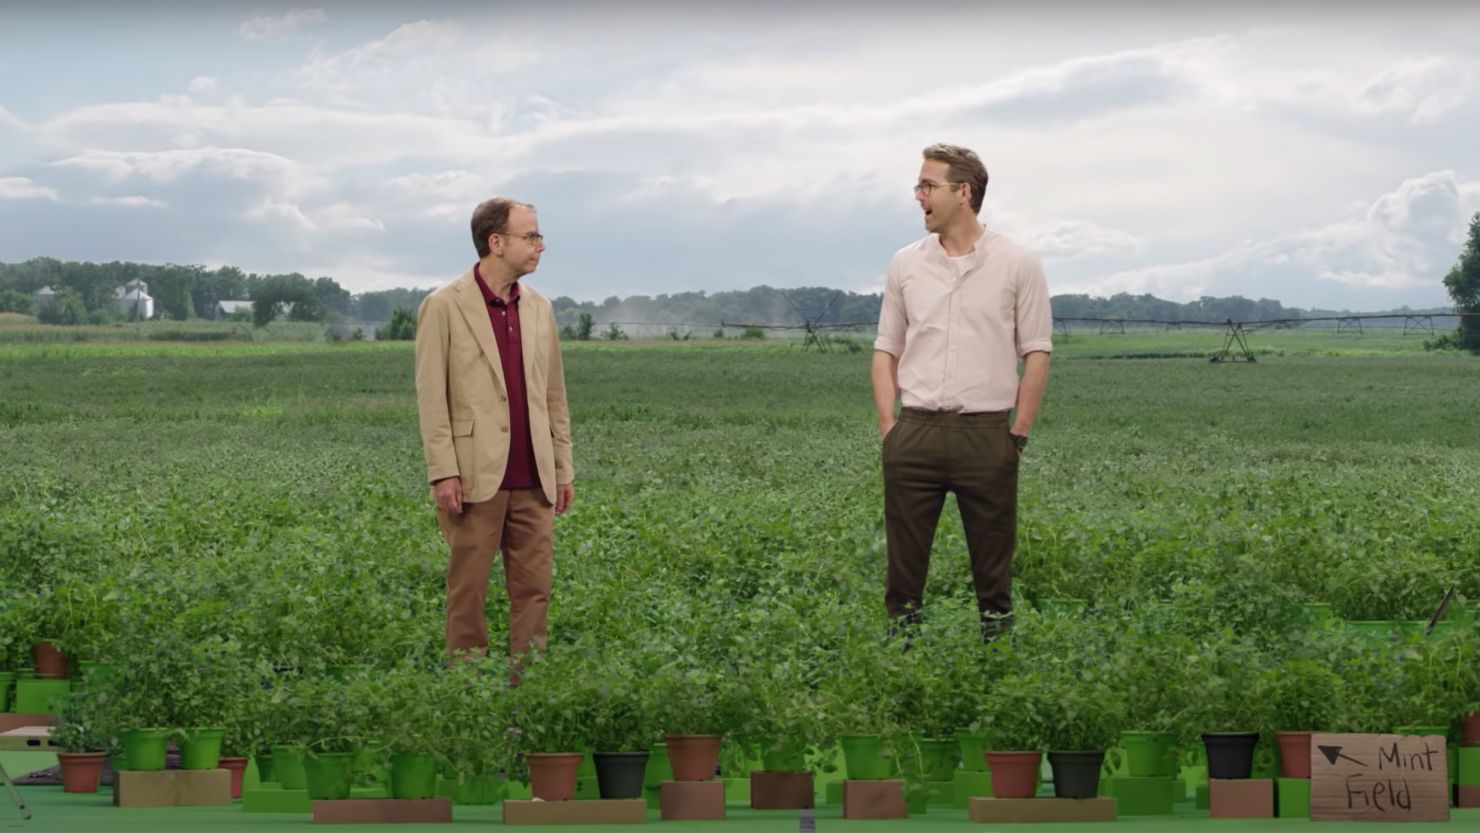 Actors Rick Moranis and Ryan Reynolds chat in a new Mint Mobile commercial.